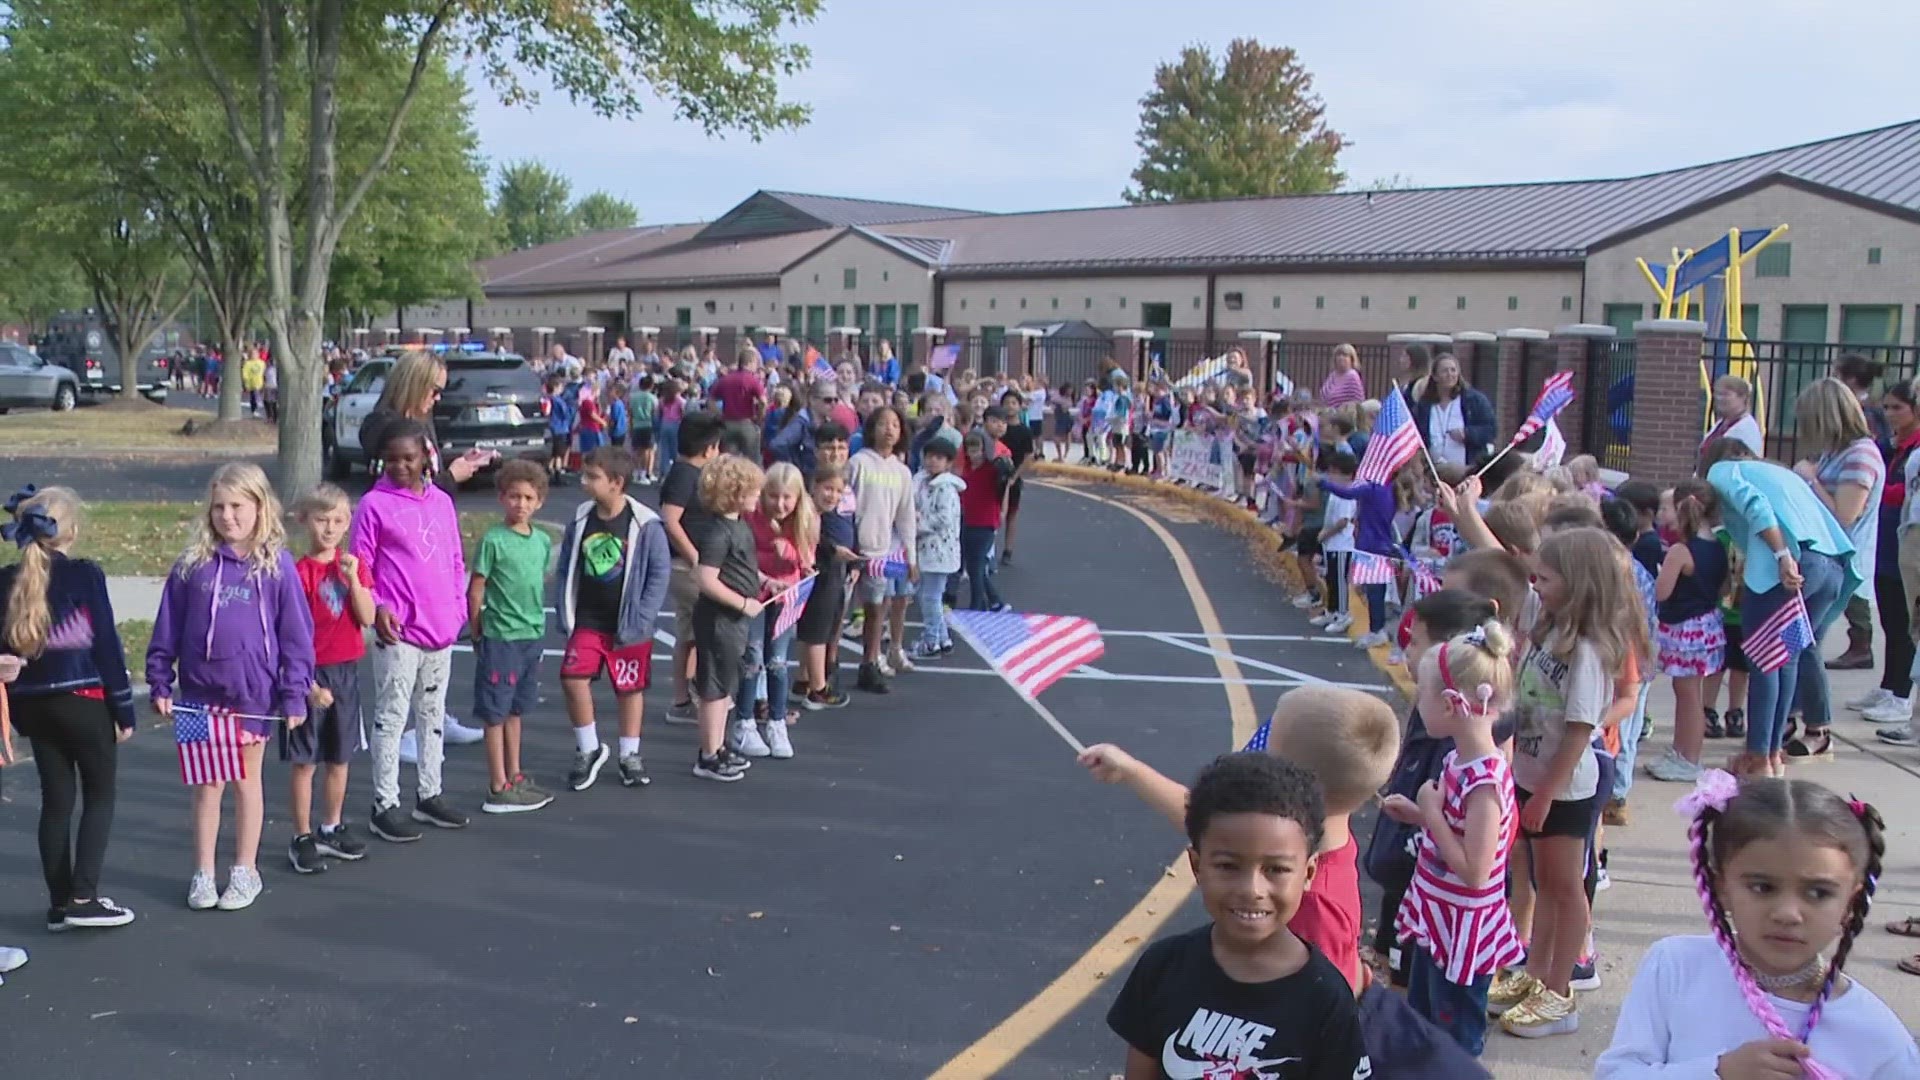 Students at White River Elementary showed their appreciated for the heroes of 9/11 and local first responders.